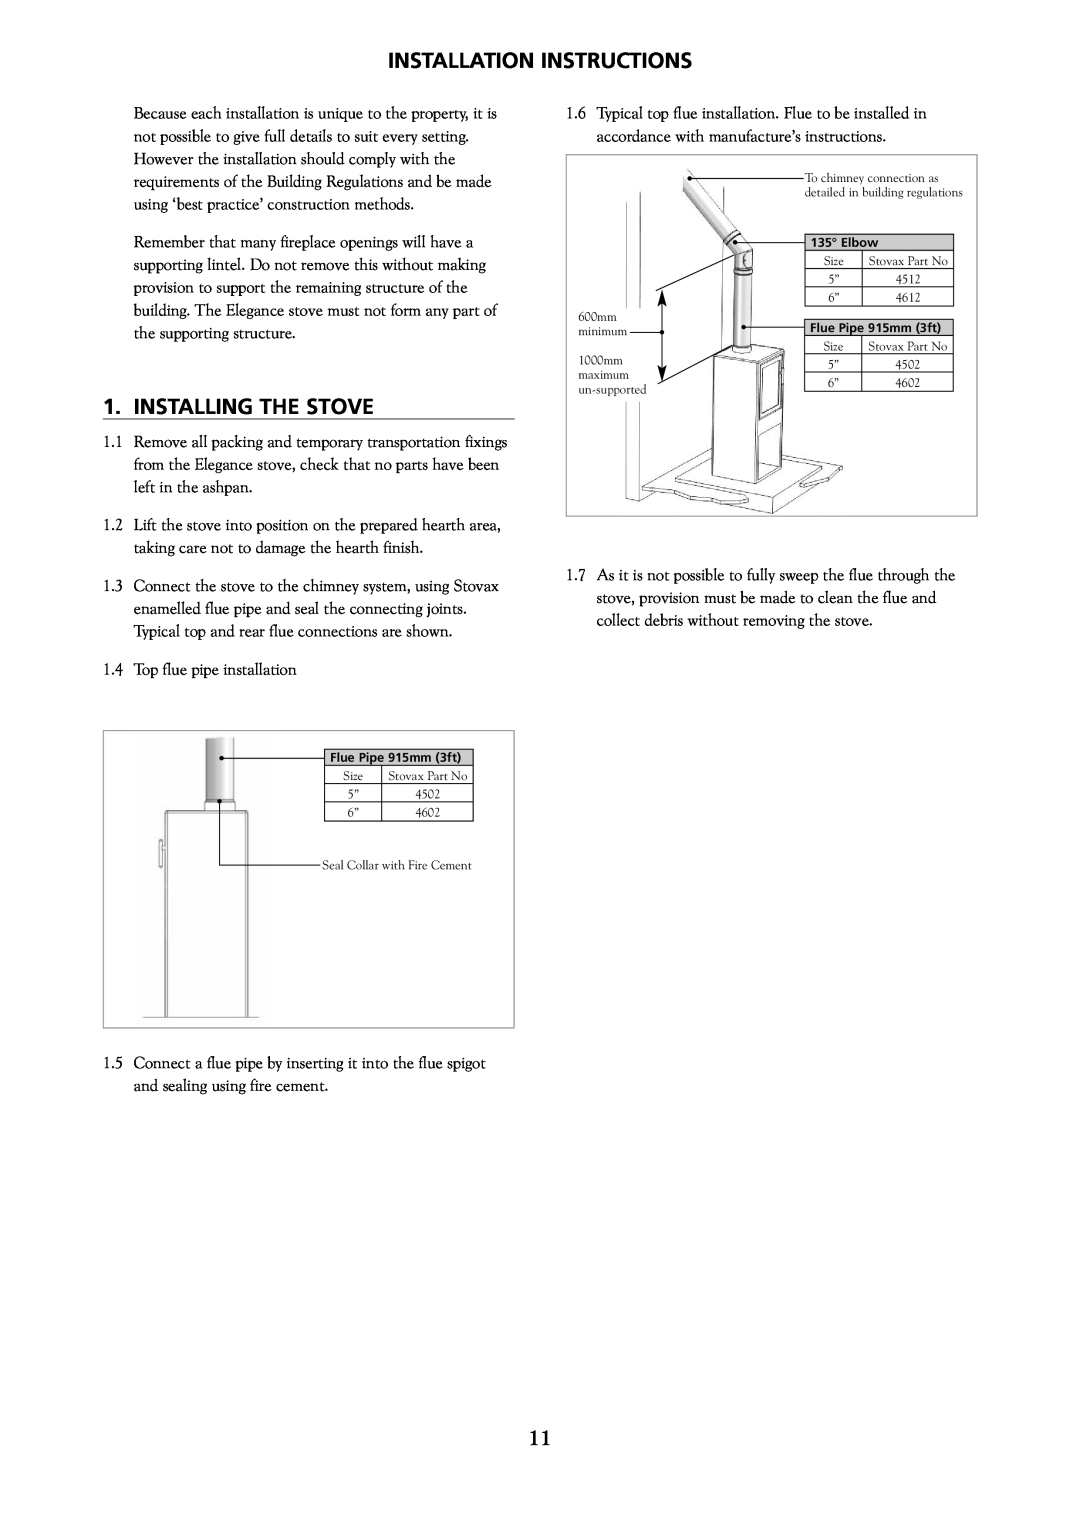 Yeoman 210, 250, 200, 280, 220, 240, 270 manual Installing The Stove, Installation Instructions 